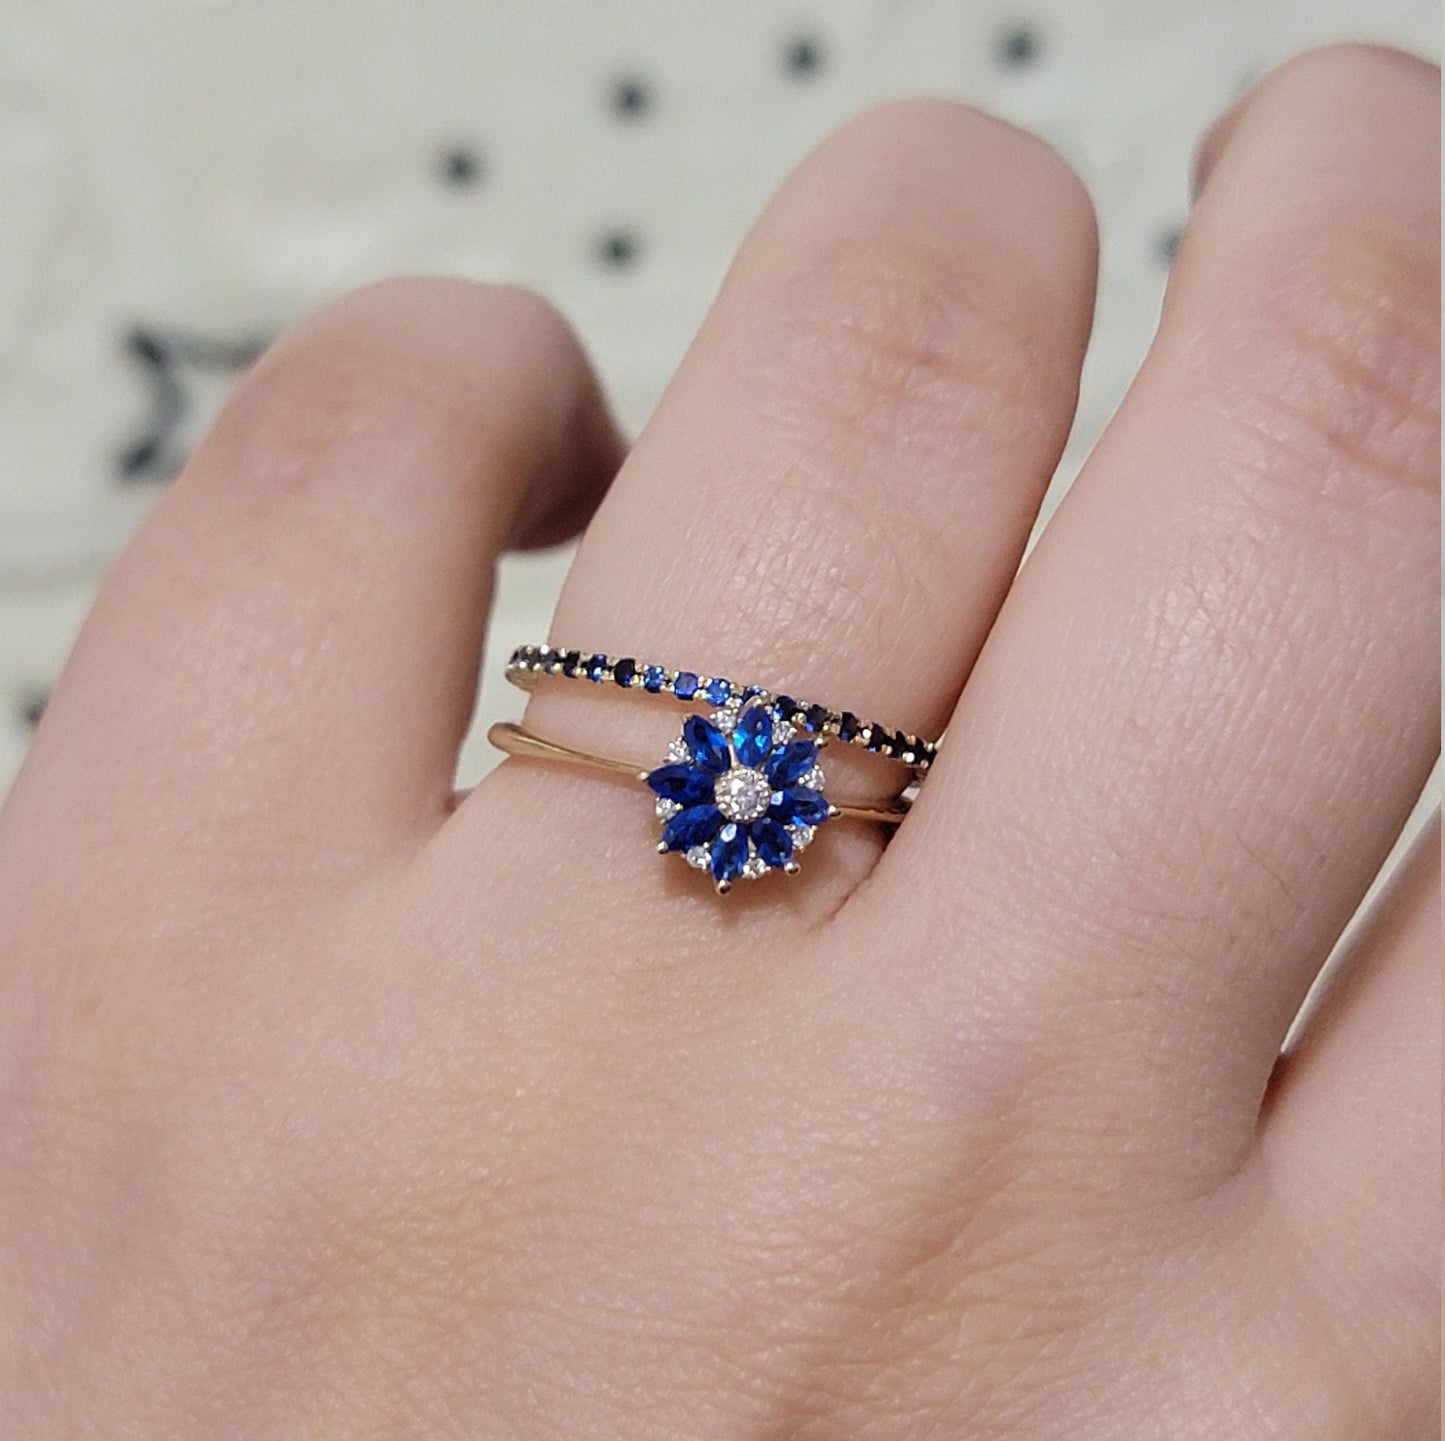 Diamond Halo Cluster Ring in 14k Gold /  Blue Sapphire Cluster Ring Engagement / Diamond Floral Accent Ring / Vintage Sapphire Ring